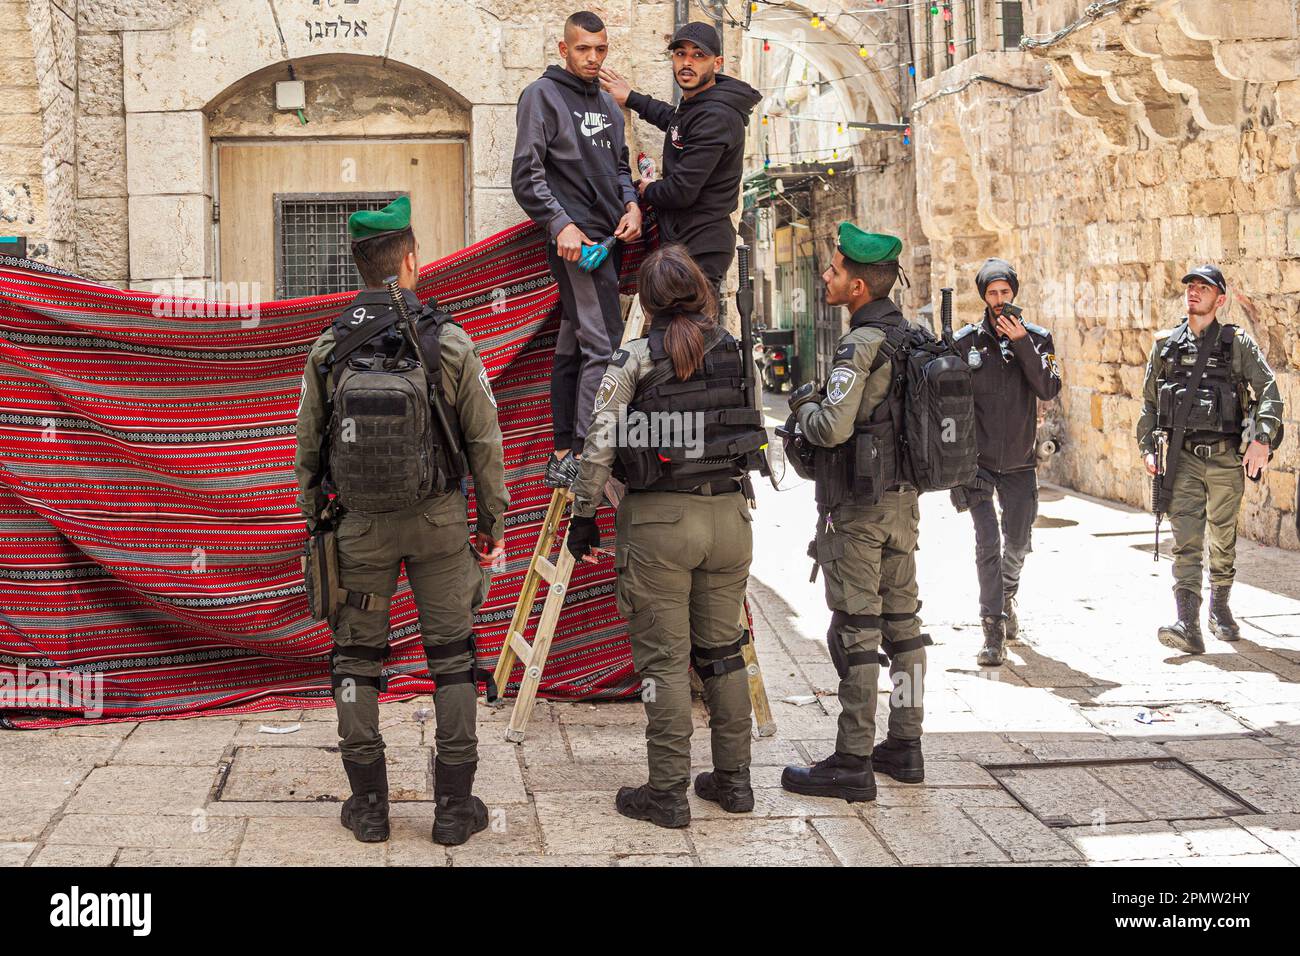 Israeli soldiers confront men hanging a carpet on a wall at the Old City in Jerusalem Stock Photo